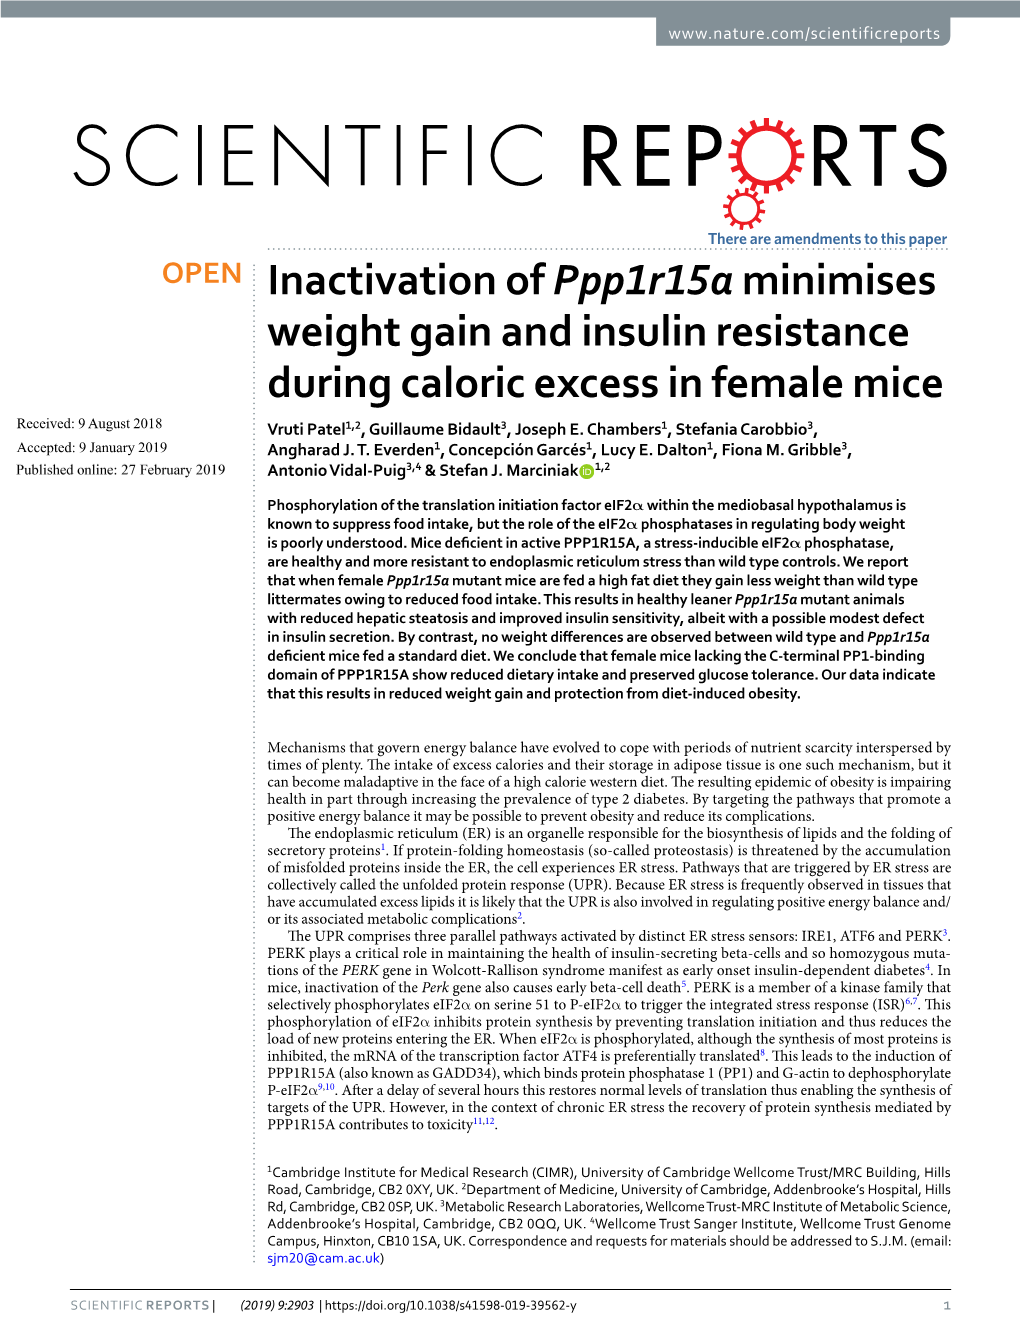 Inactivation of Ppp1r15a Minimises Weight Gain and Insulin Resistance